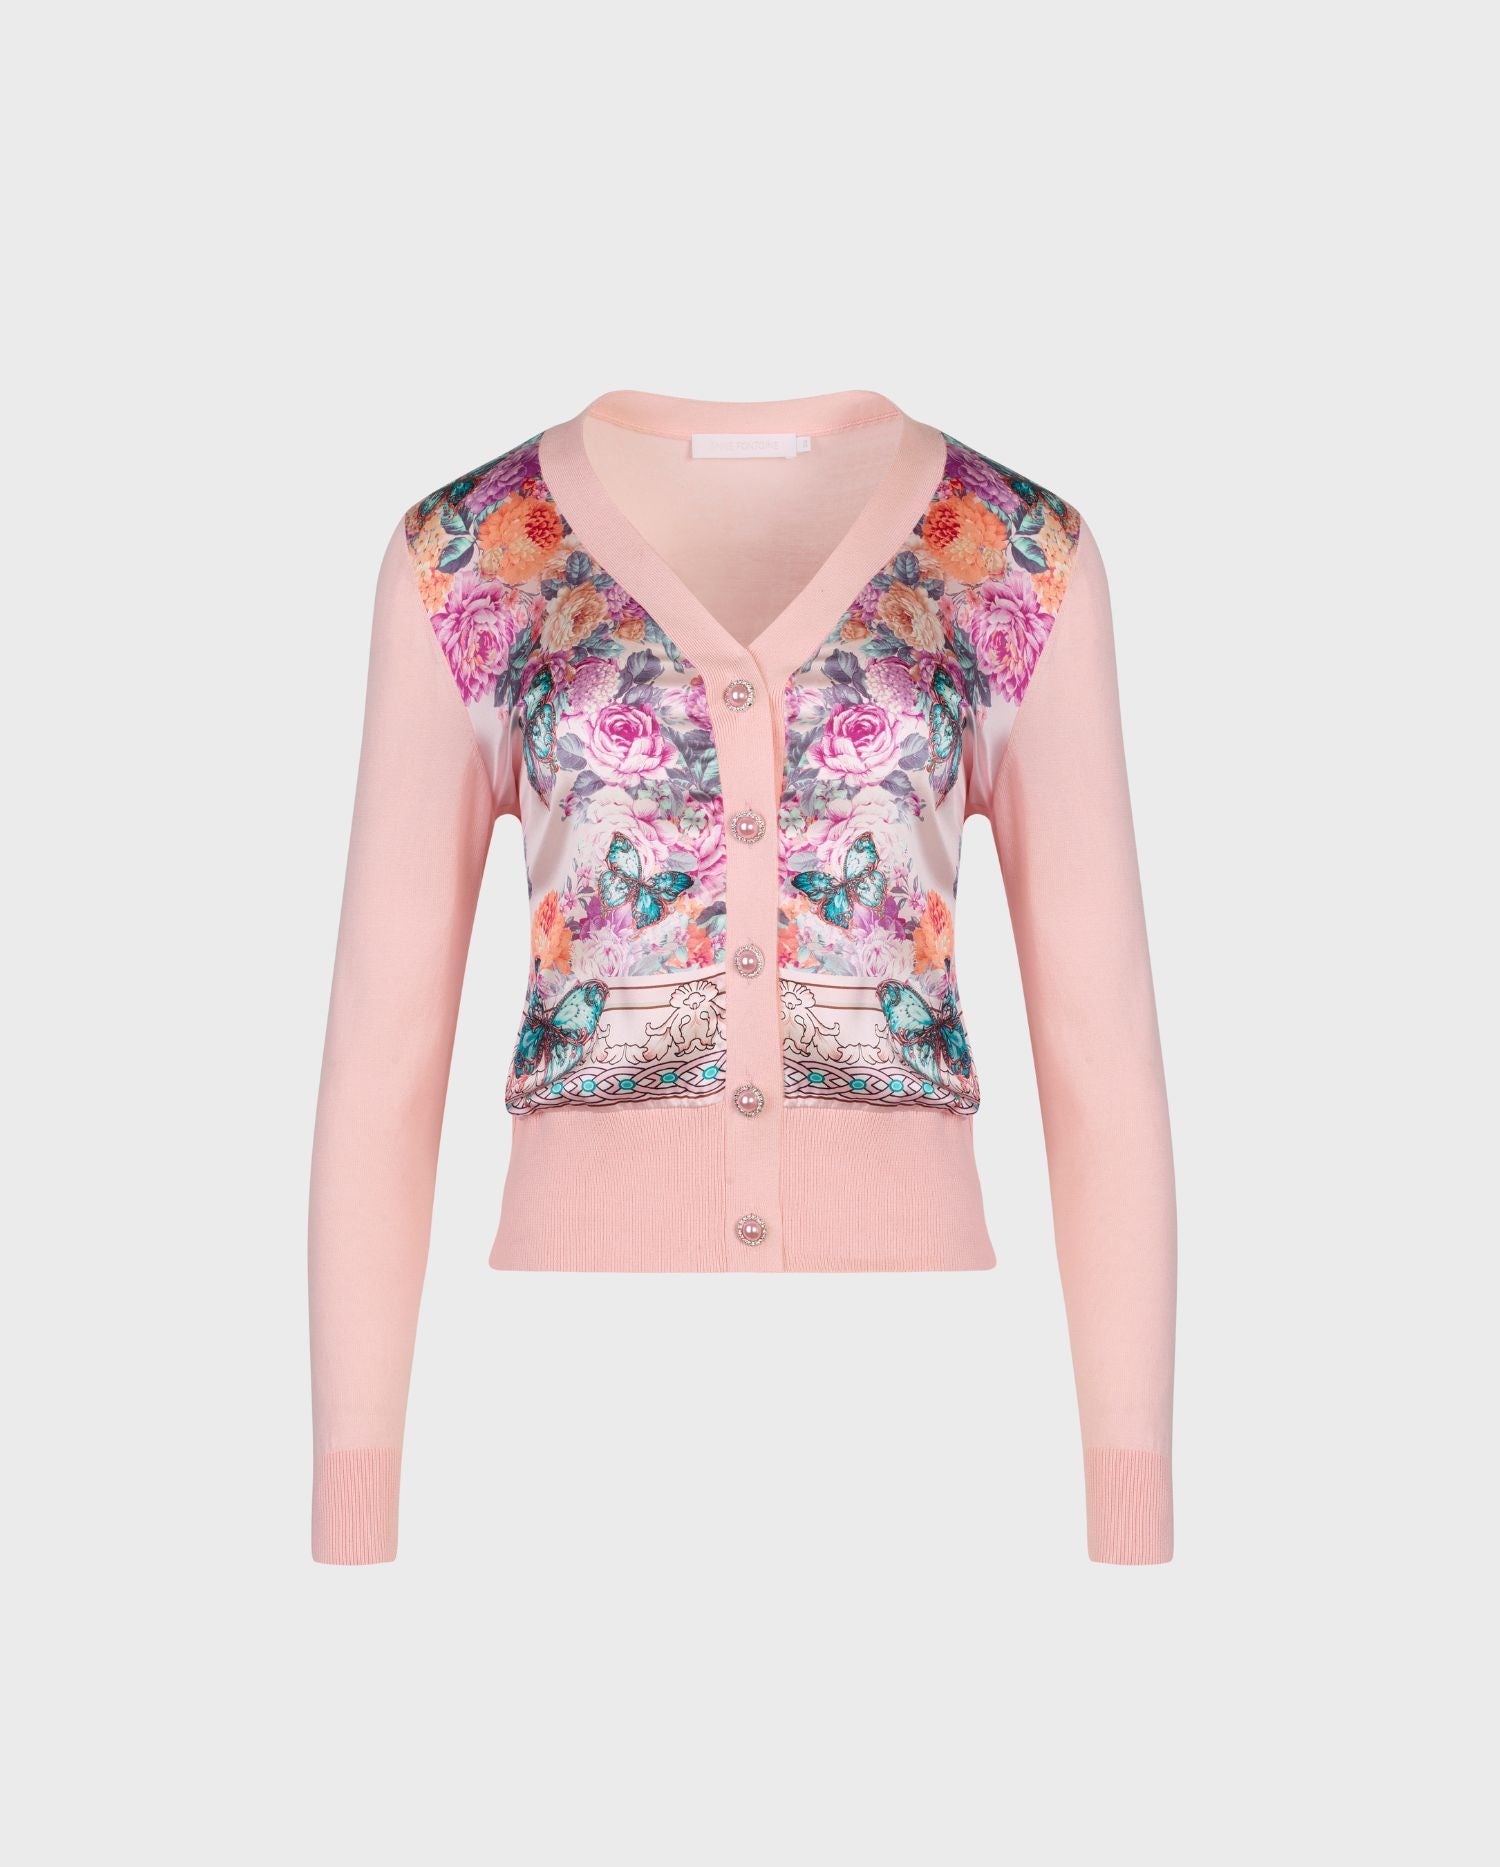 Discover the ZILIA Pink Long Sleeve Cardigan With Floral Butterfly Printed Design from designer ANNE FONTAINE